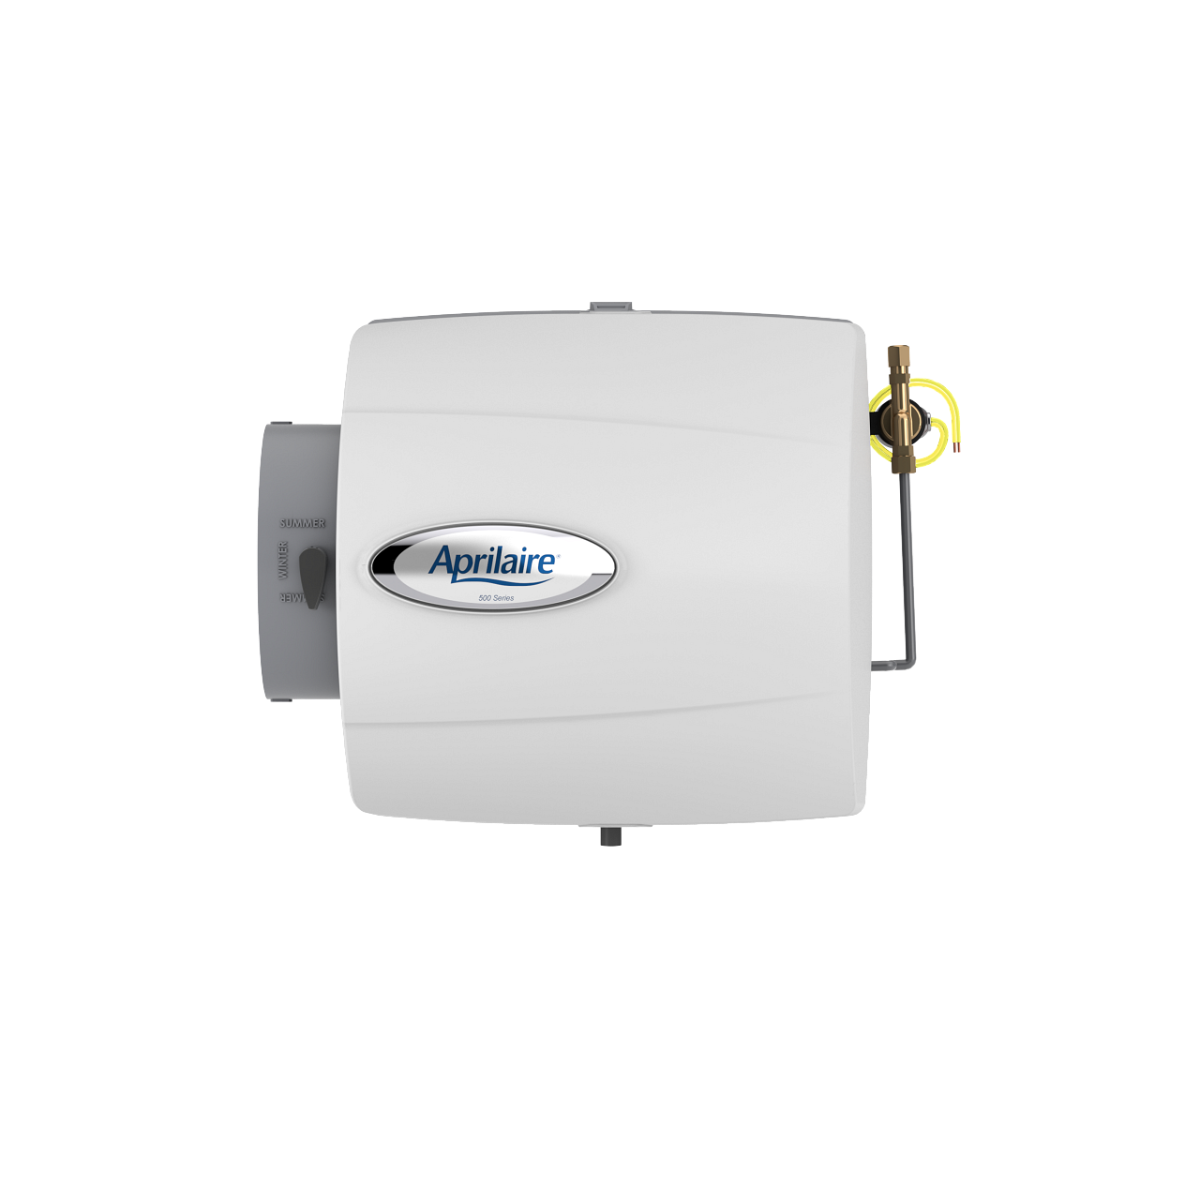 Aprilaire 500 Humidifier Automatic Bypass Digital Control